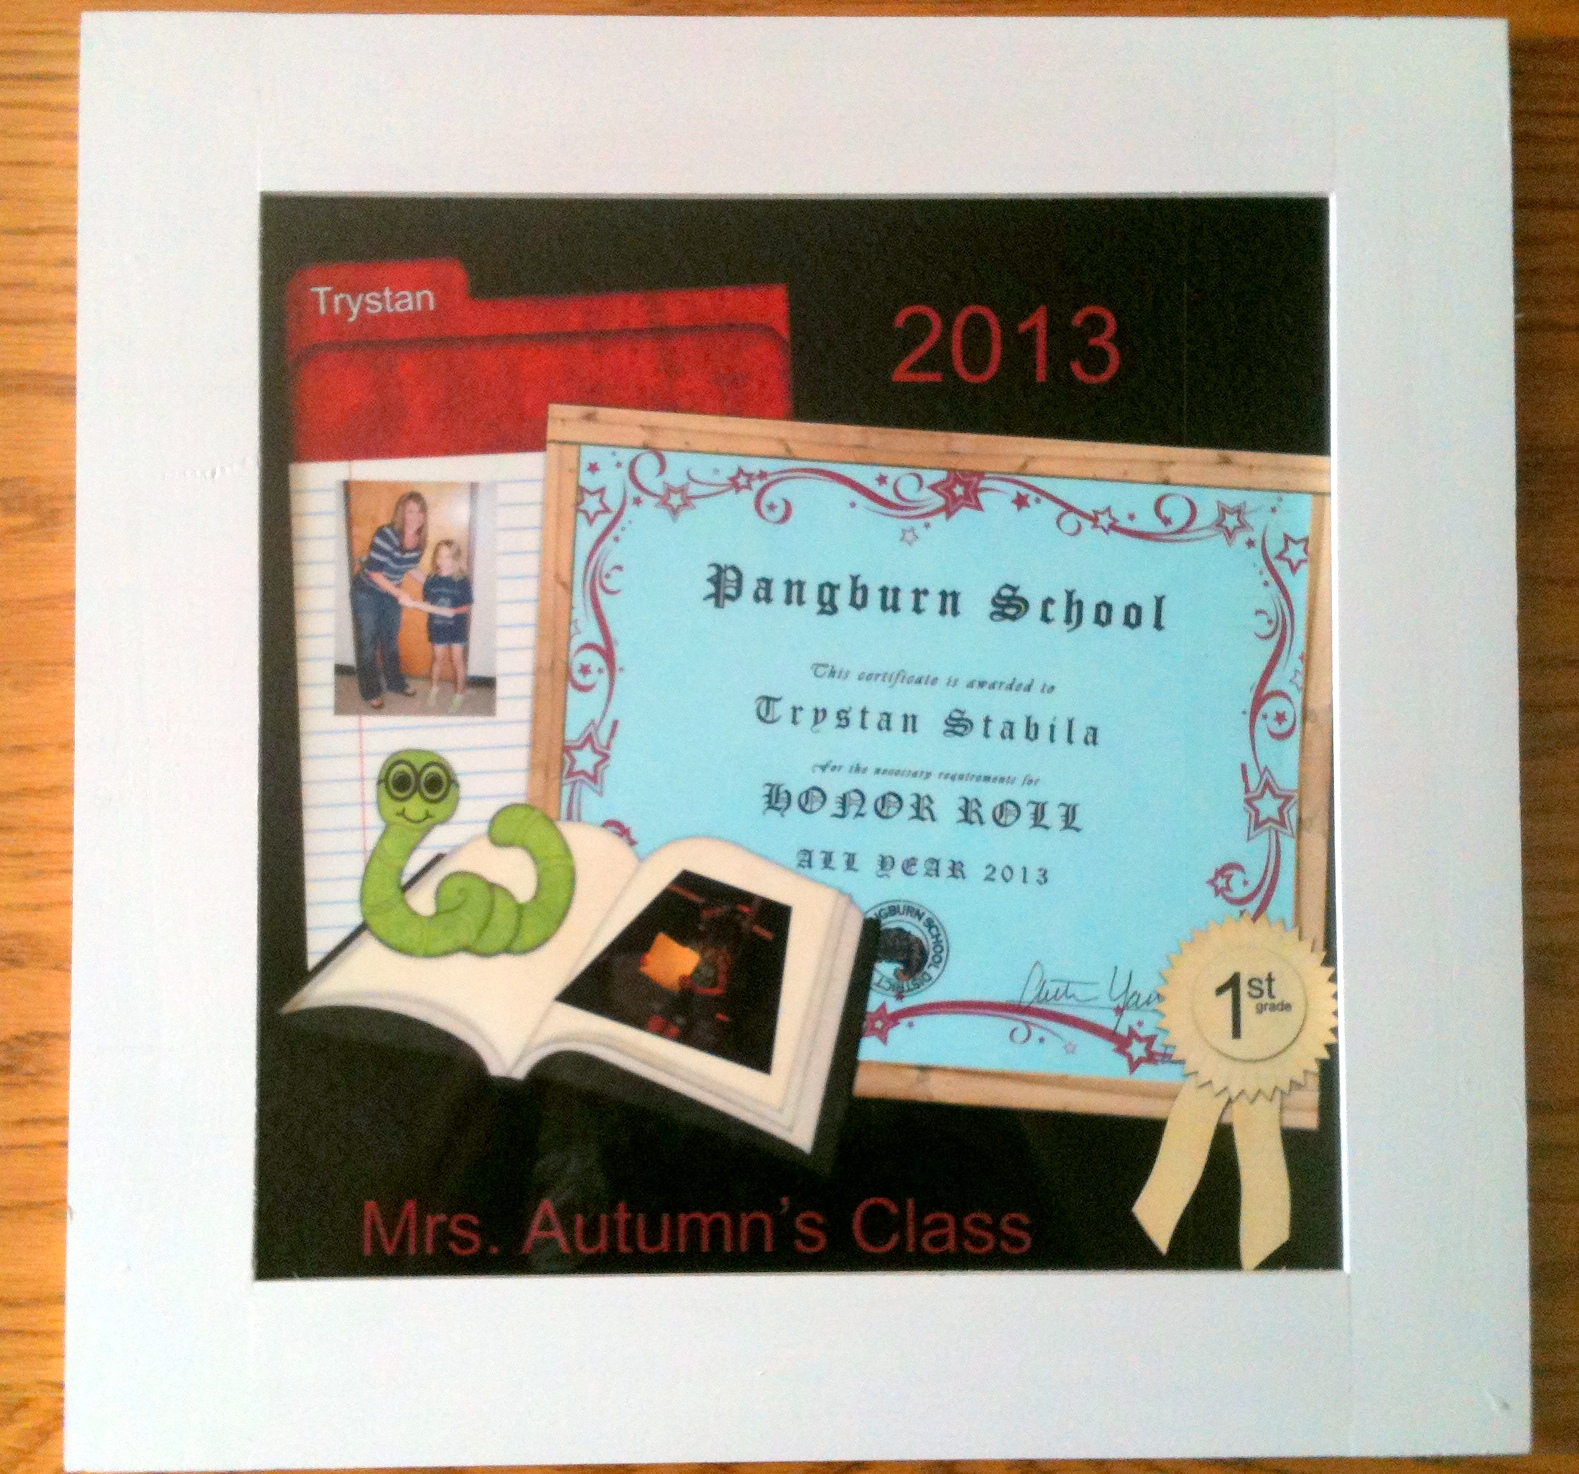 Trystan's Award made with sublimation printing